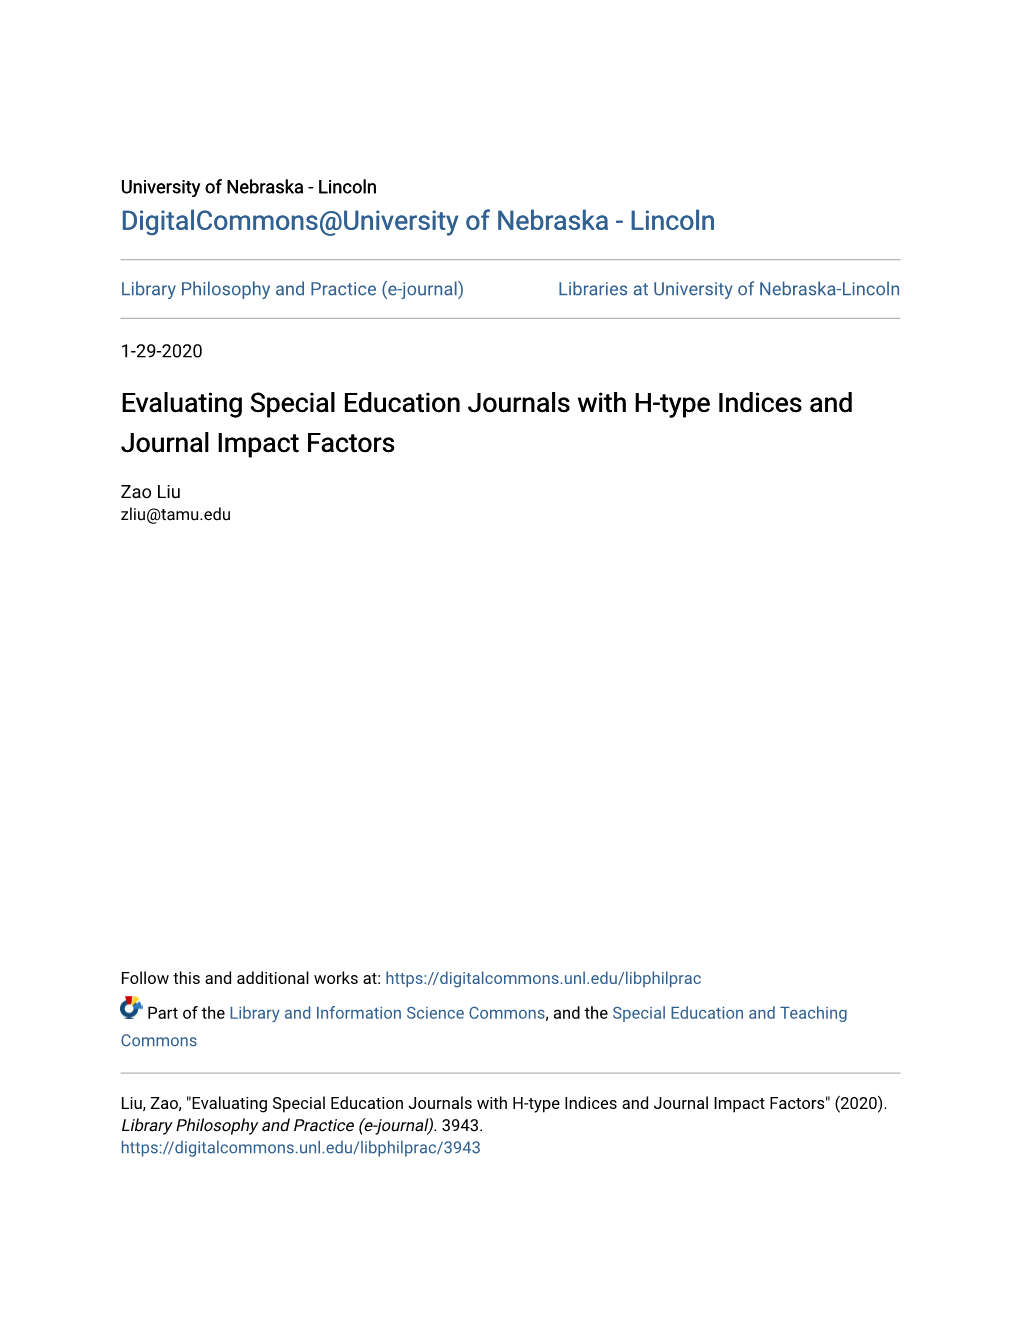 Evaluating Special Education Journals with H-Type Indices and Journal Impact Factors